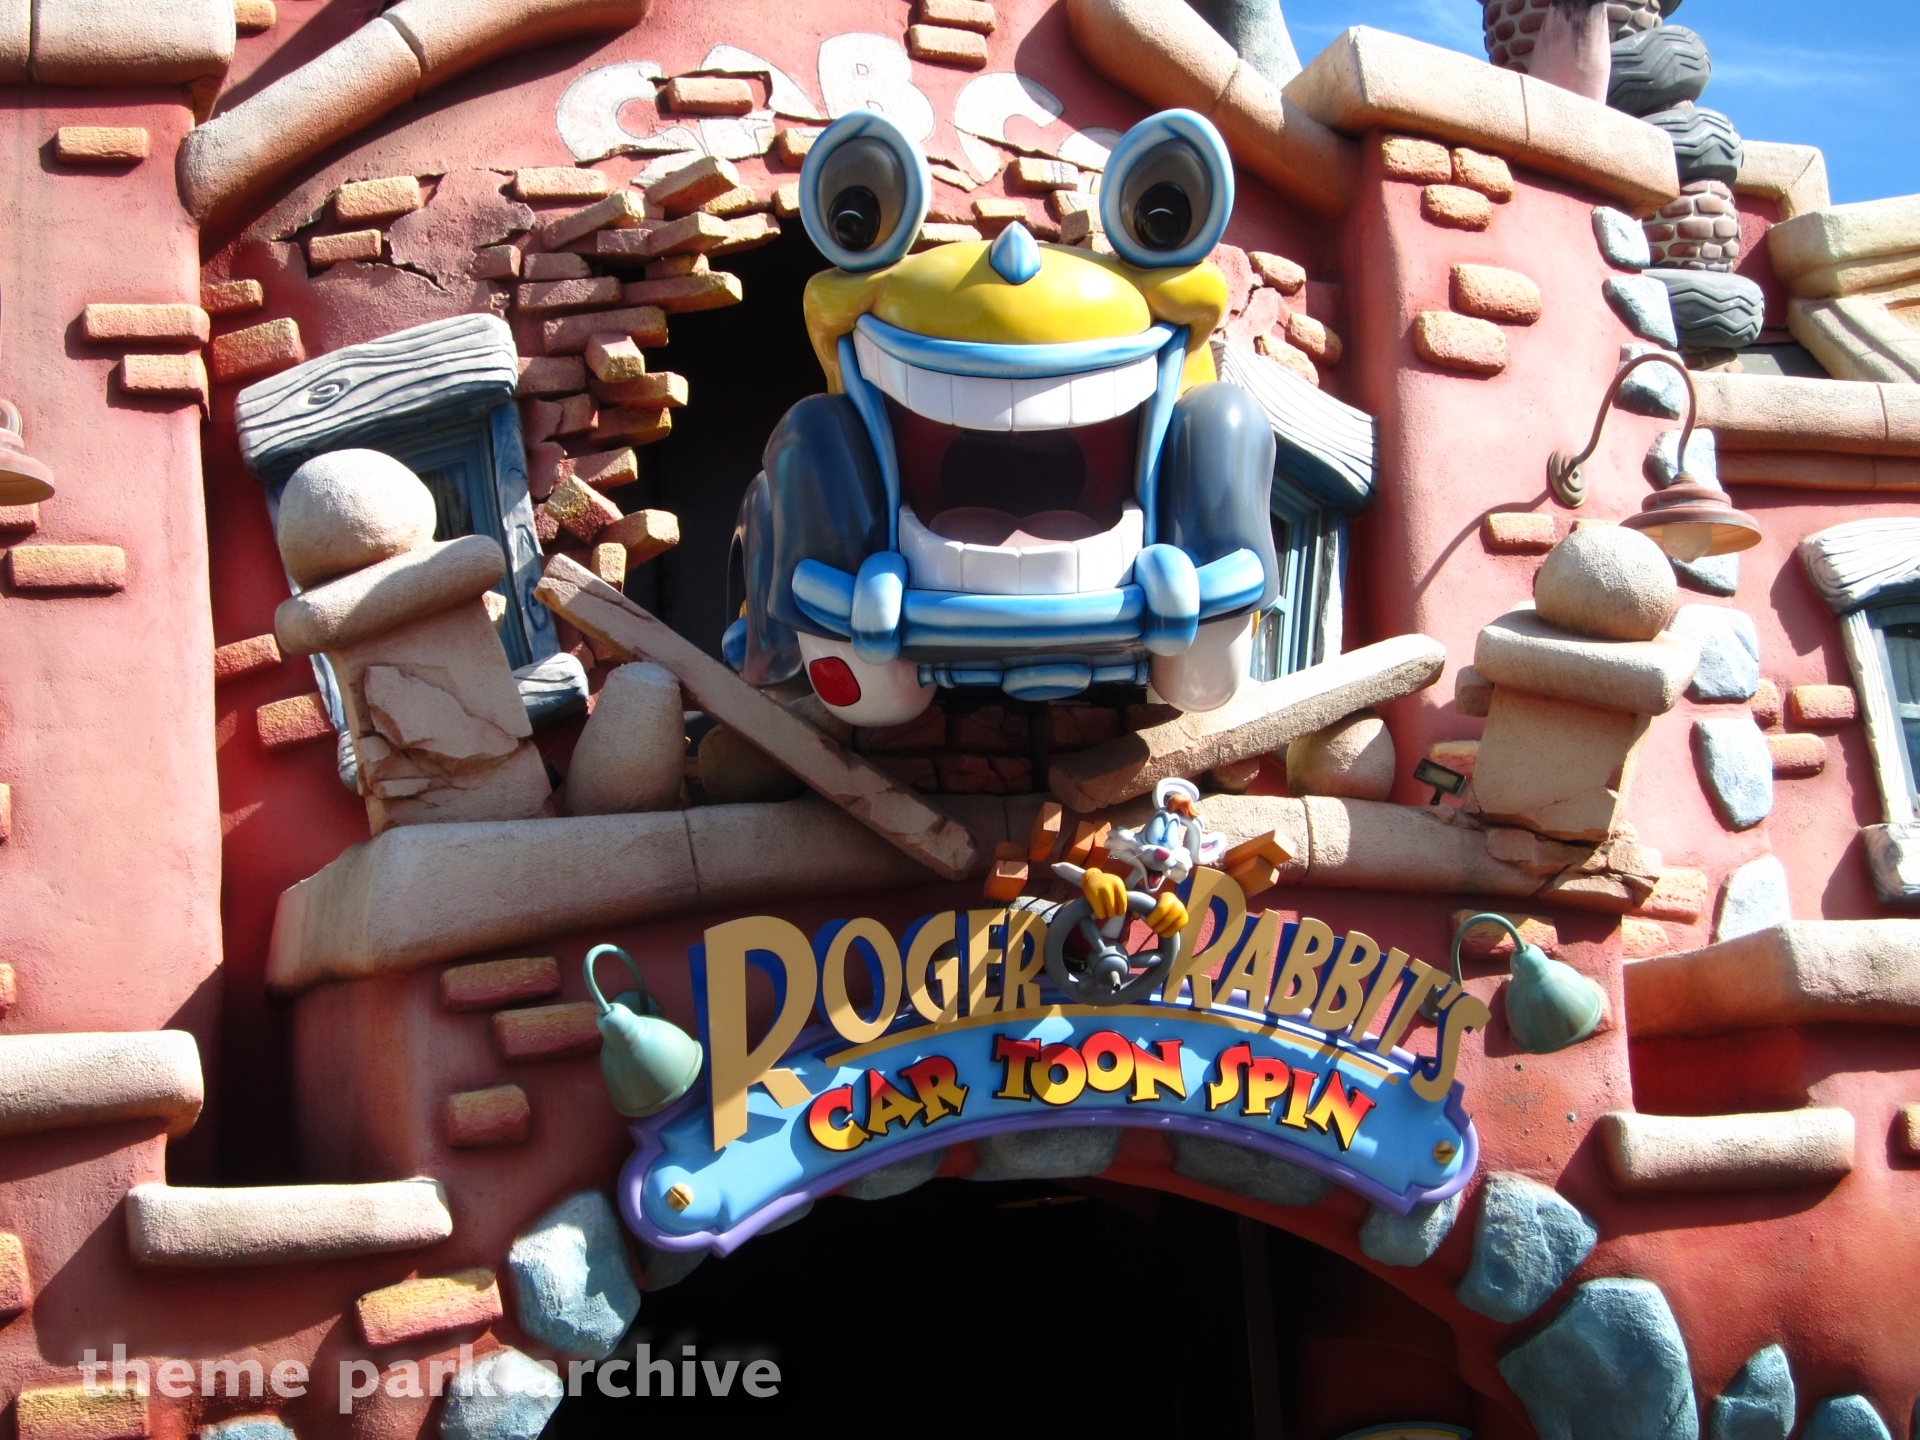 Roger Rabbit's Car Toon Spin at Disneyland | Theme Park Archive